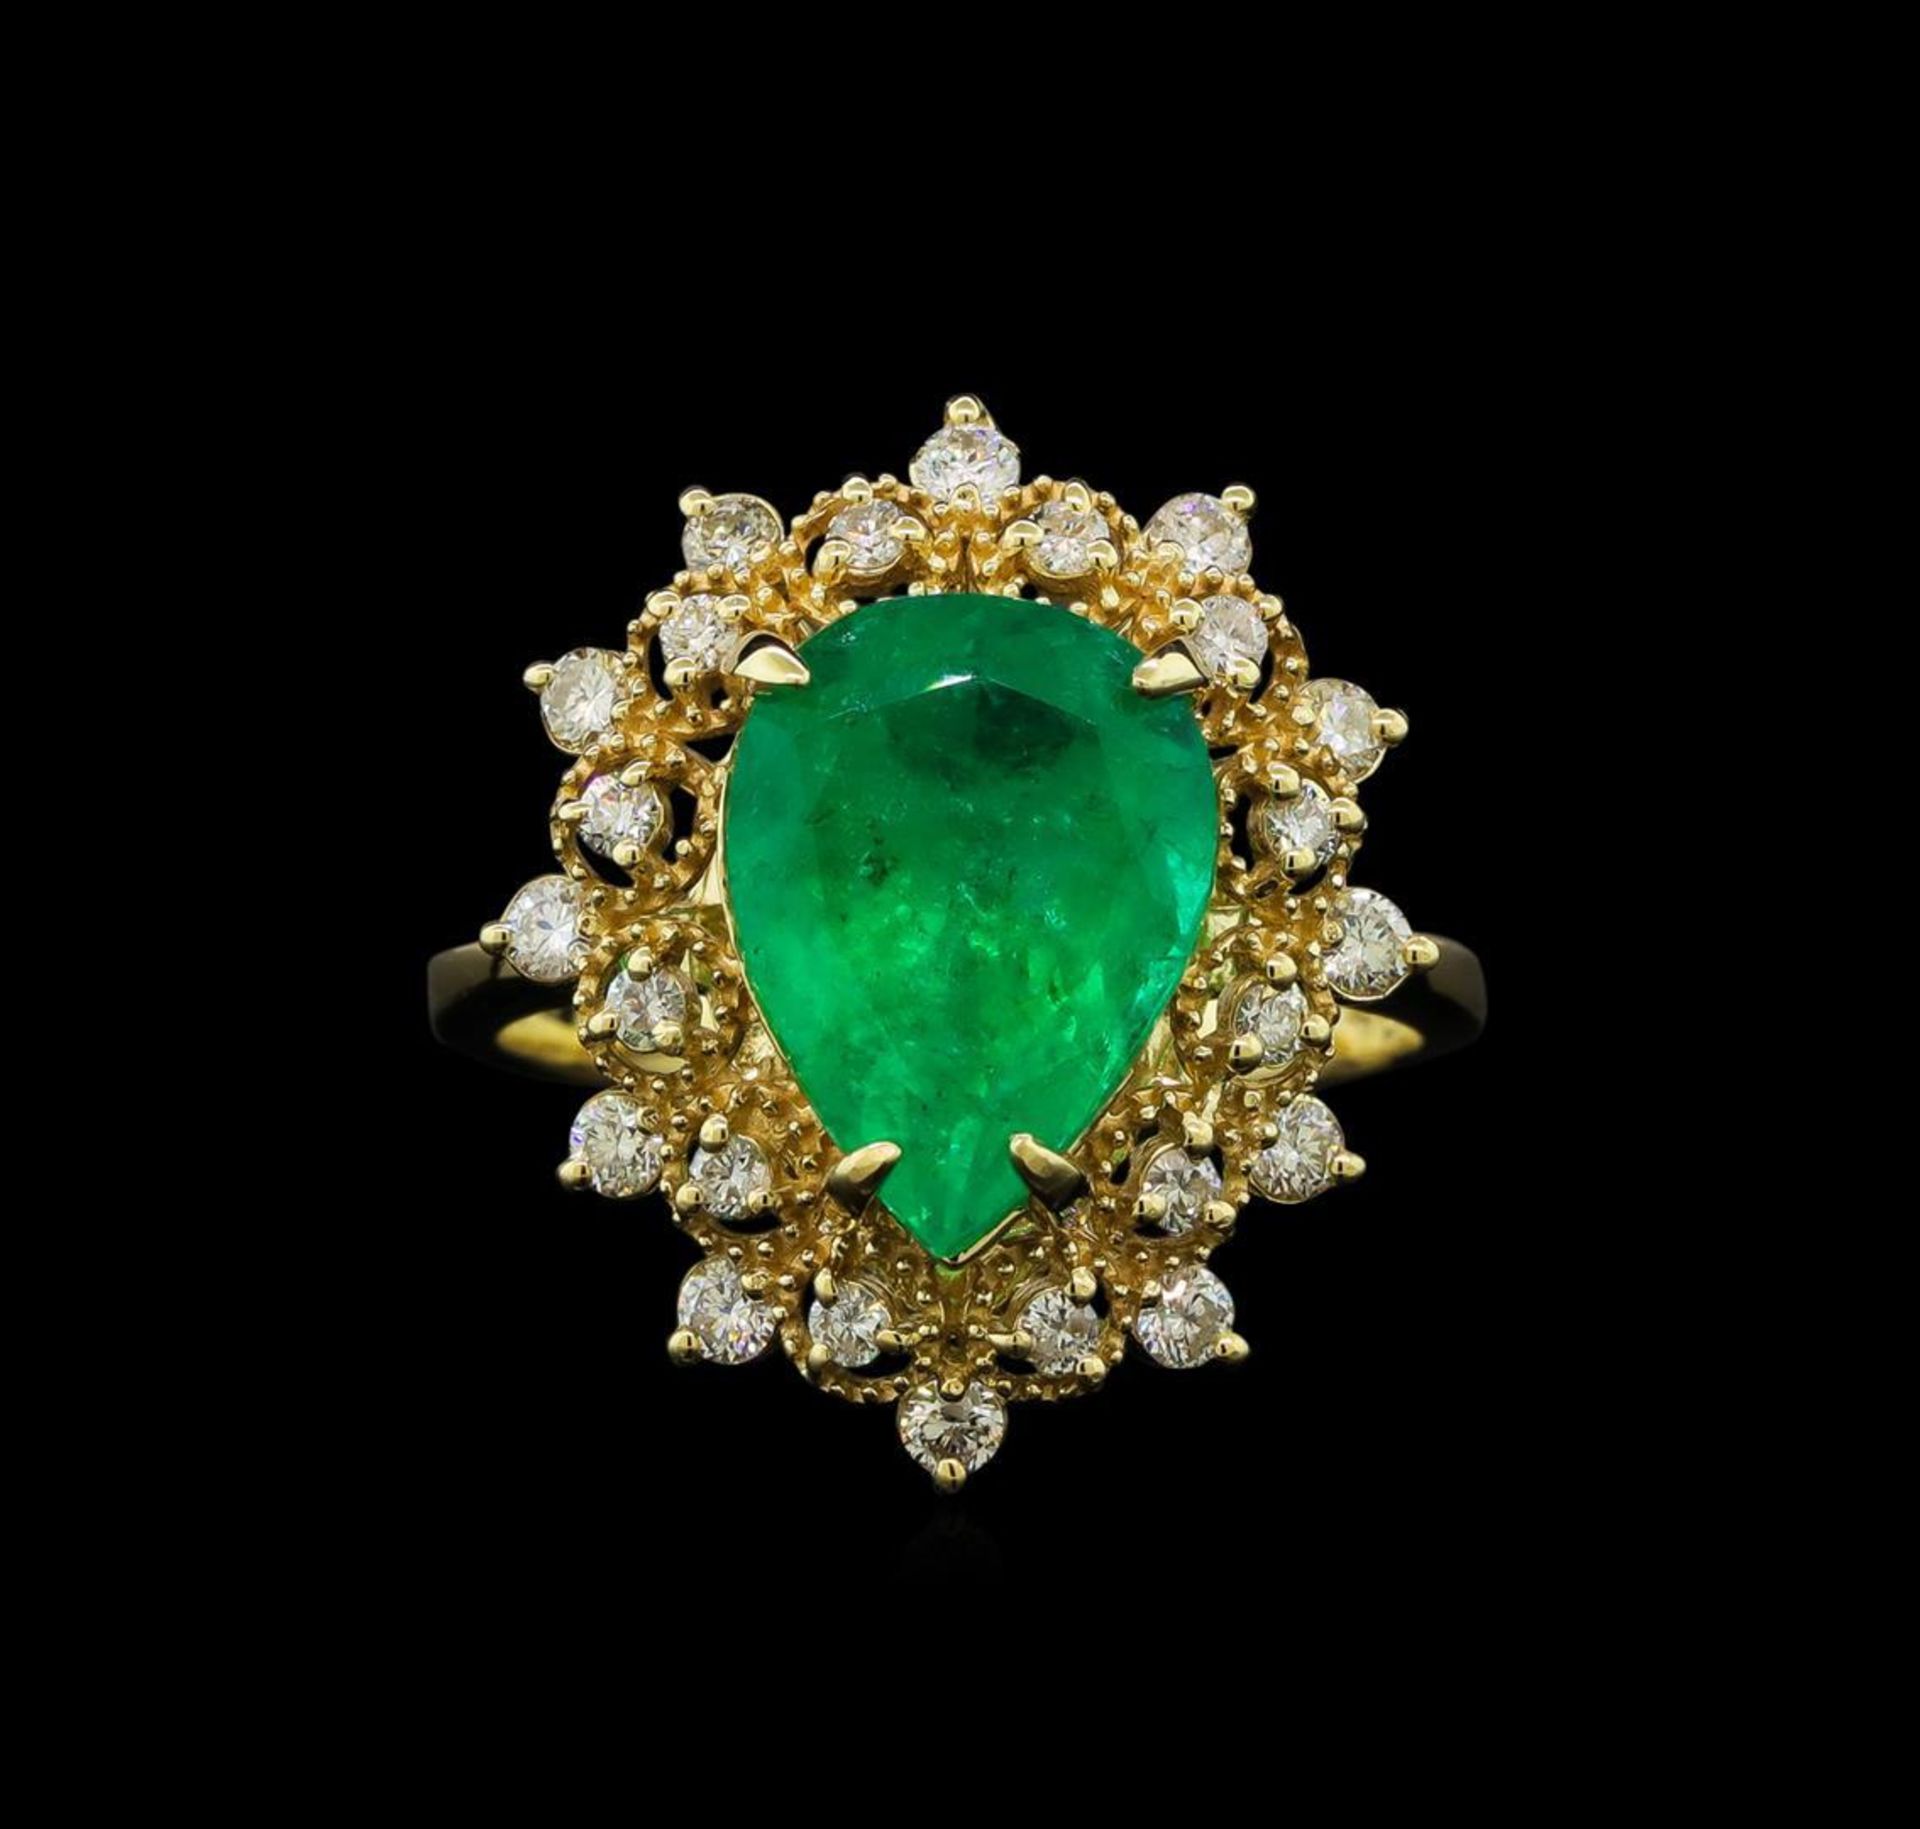 3.65 ctw Emerald and Diamond Ring - 14KT Yellow Gold - Image 2 of 5